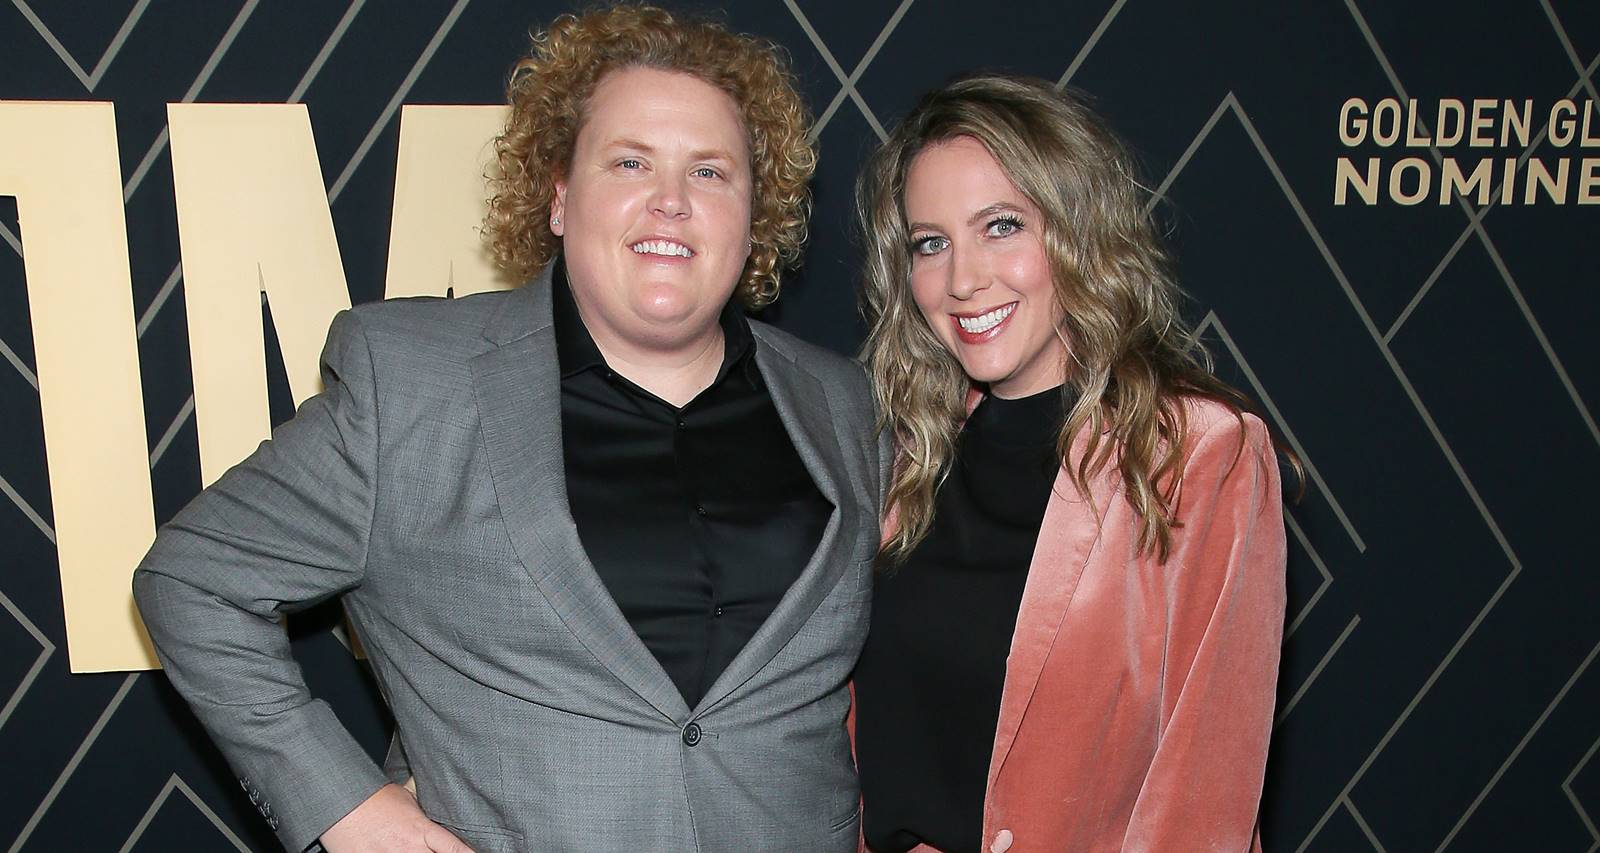 Jacquelyn Smith Wiki, Age, Family, Education, Work & Facts About Comedian, Fortune Feimster’s Fiancée